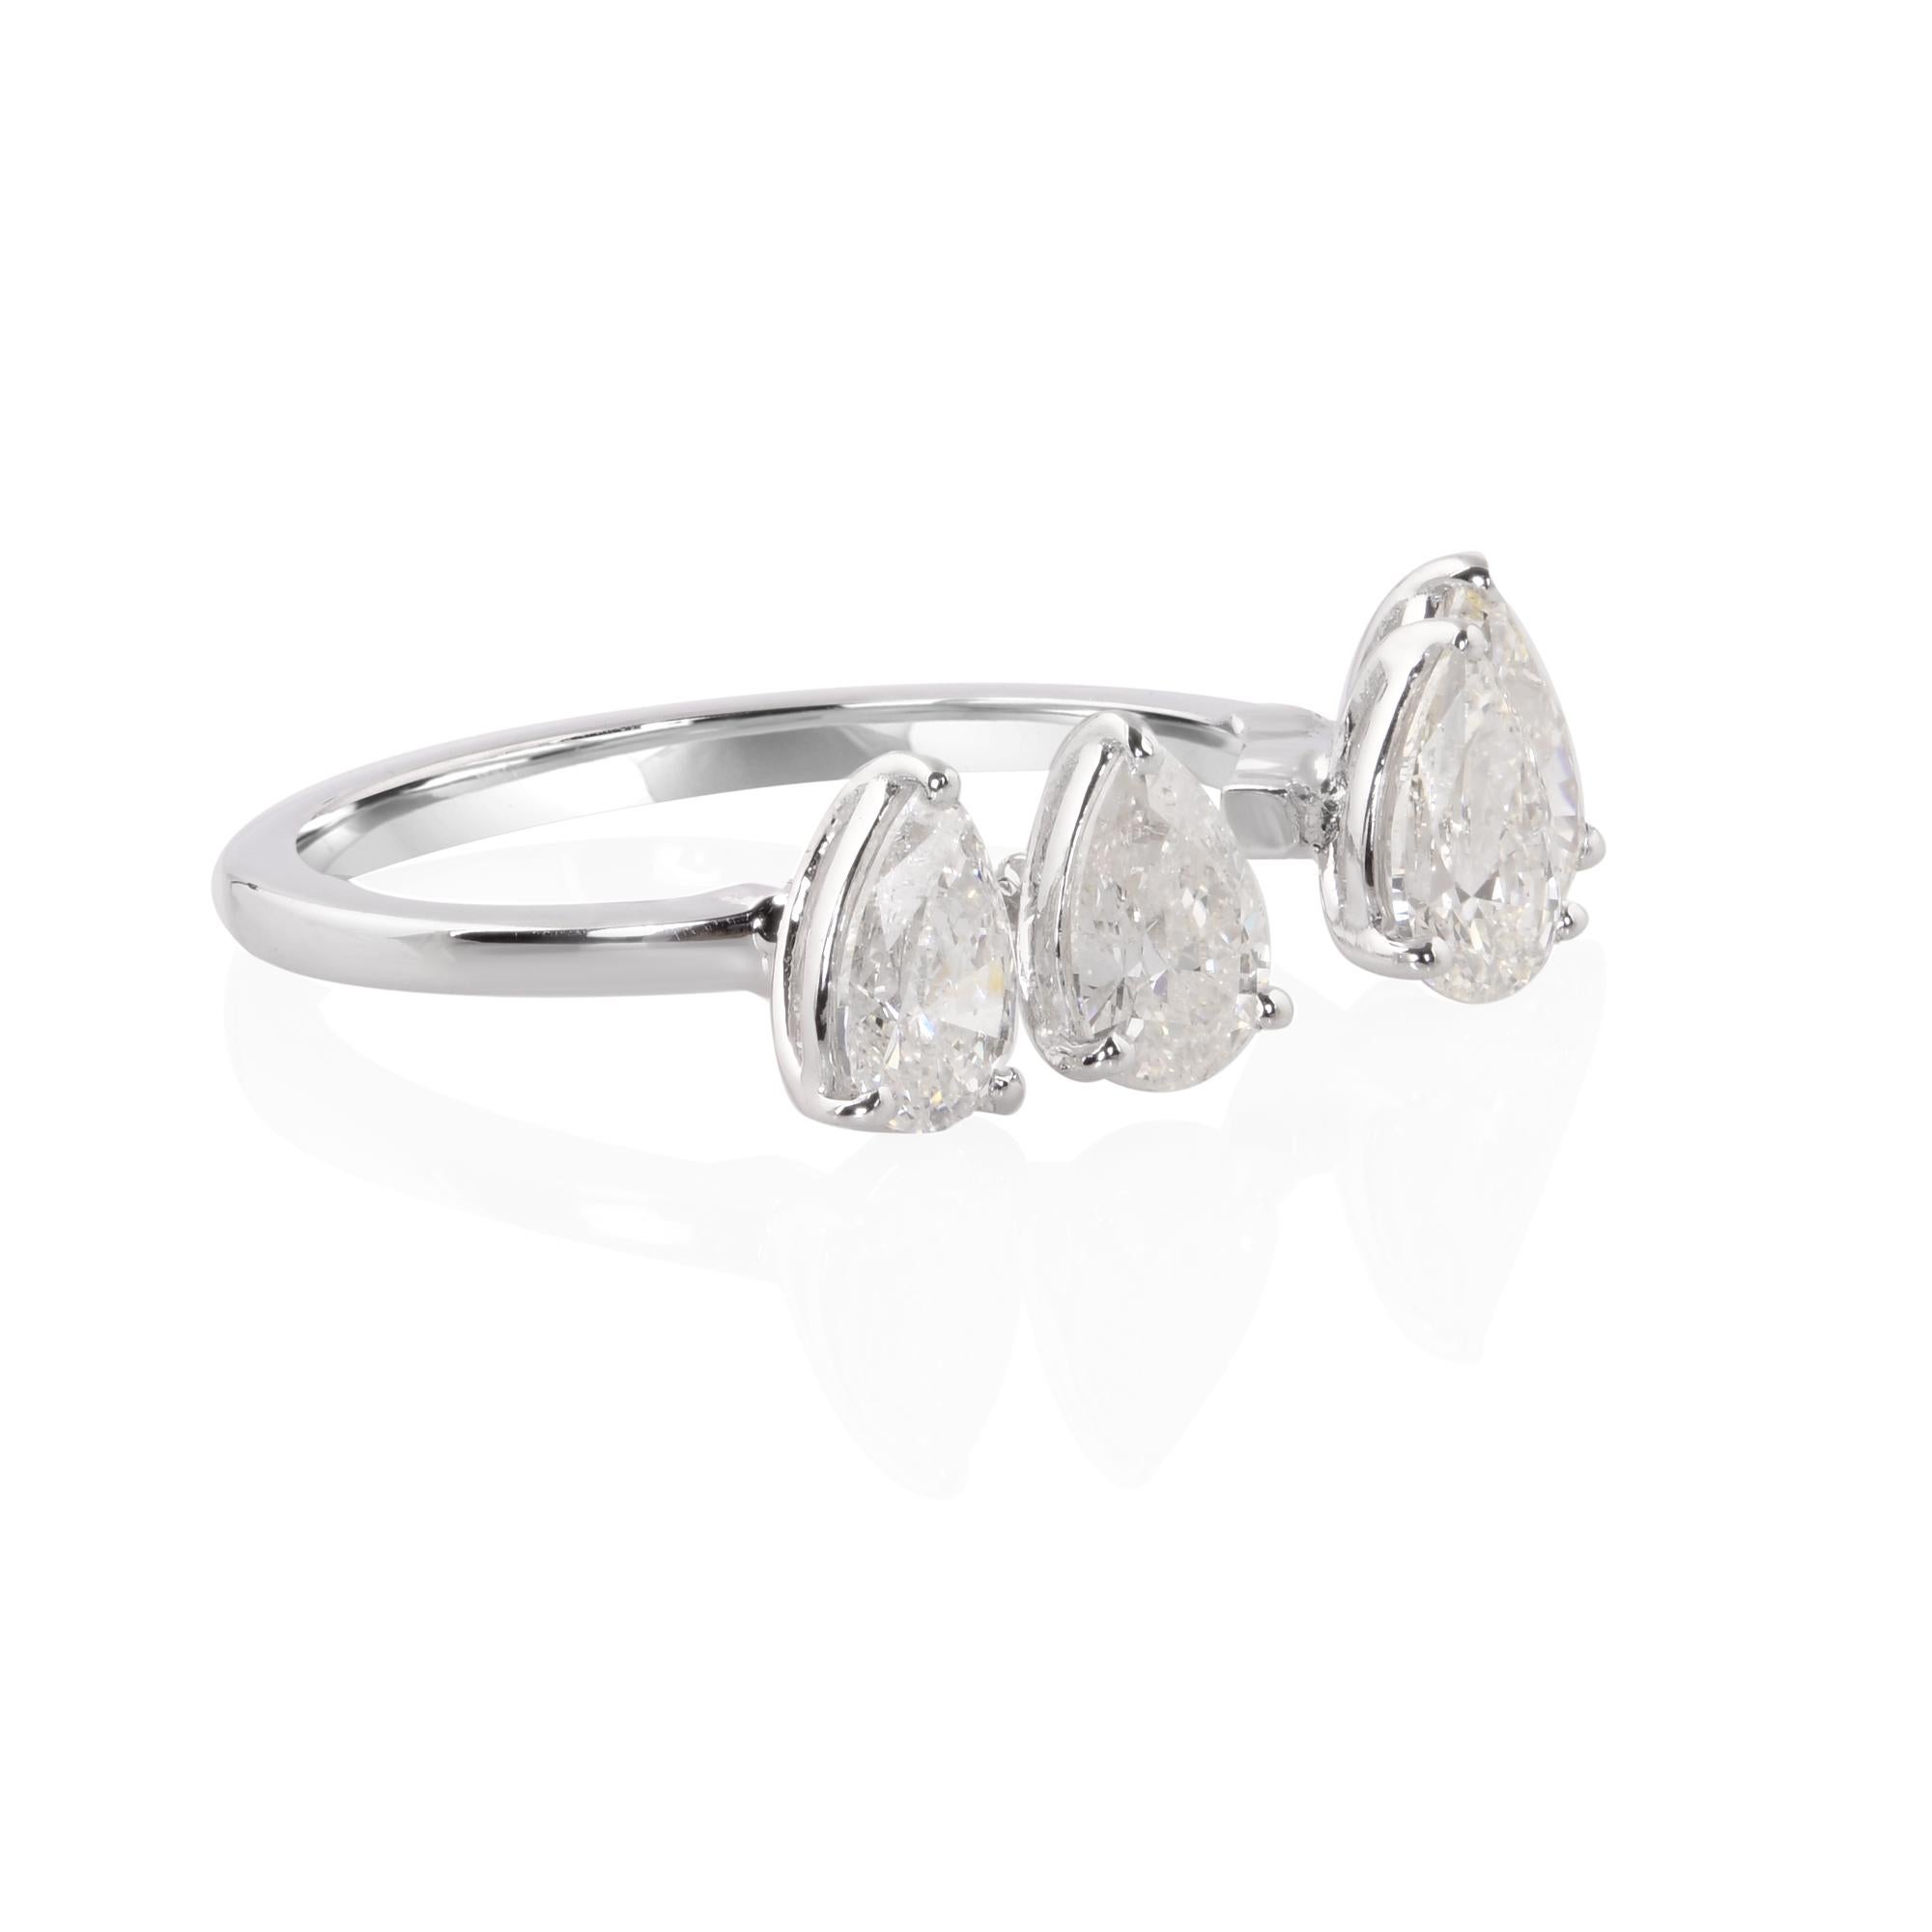 At the heart of this stunning cuff ring lies a breathtaking pear-shaped diamond, boasting a weight of 1.65 carats. Its graceful silhouette and brilliant facets exude a captivating allure that mesmerizes the beholder. Set against the backdrop of